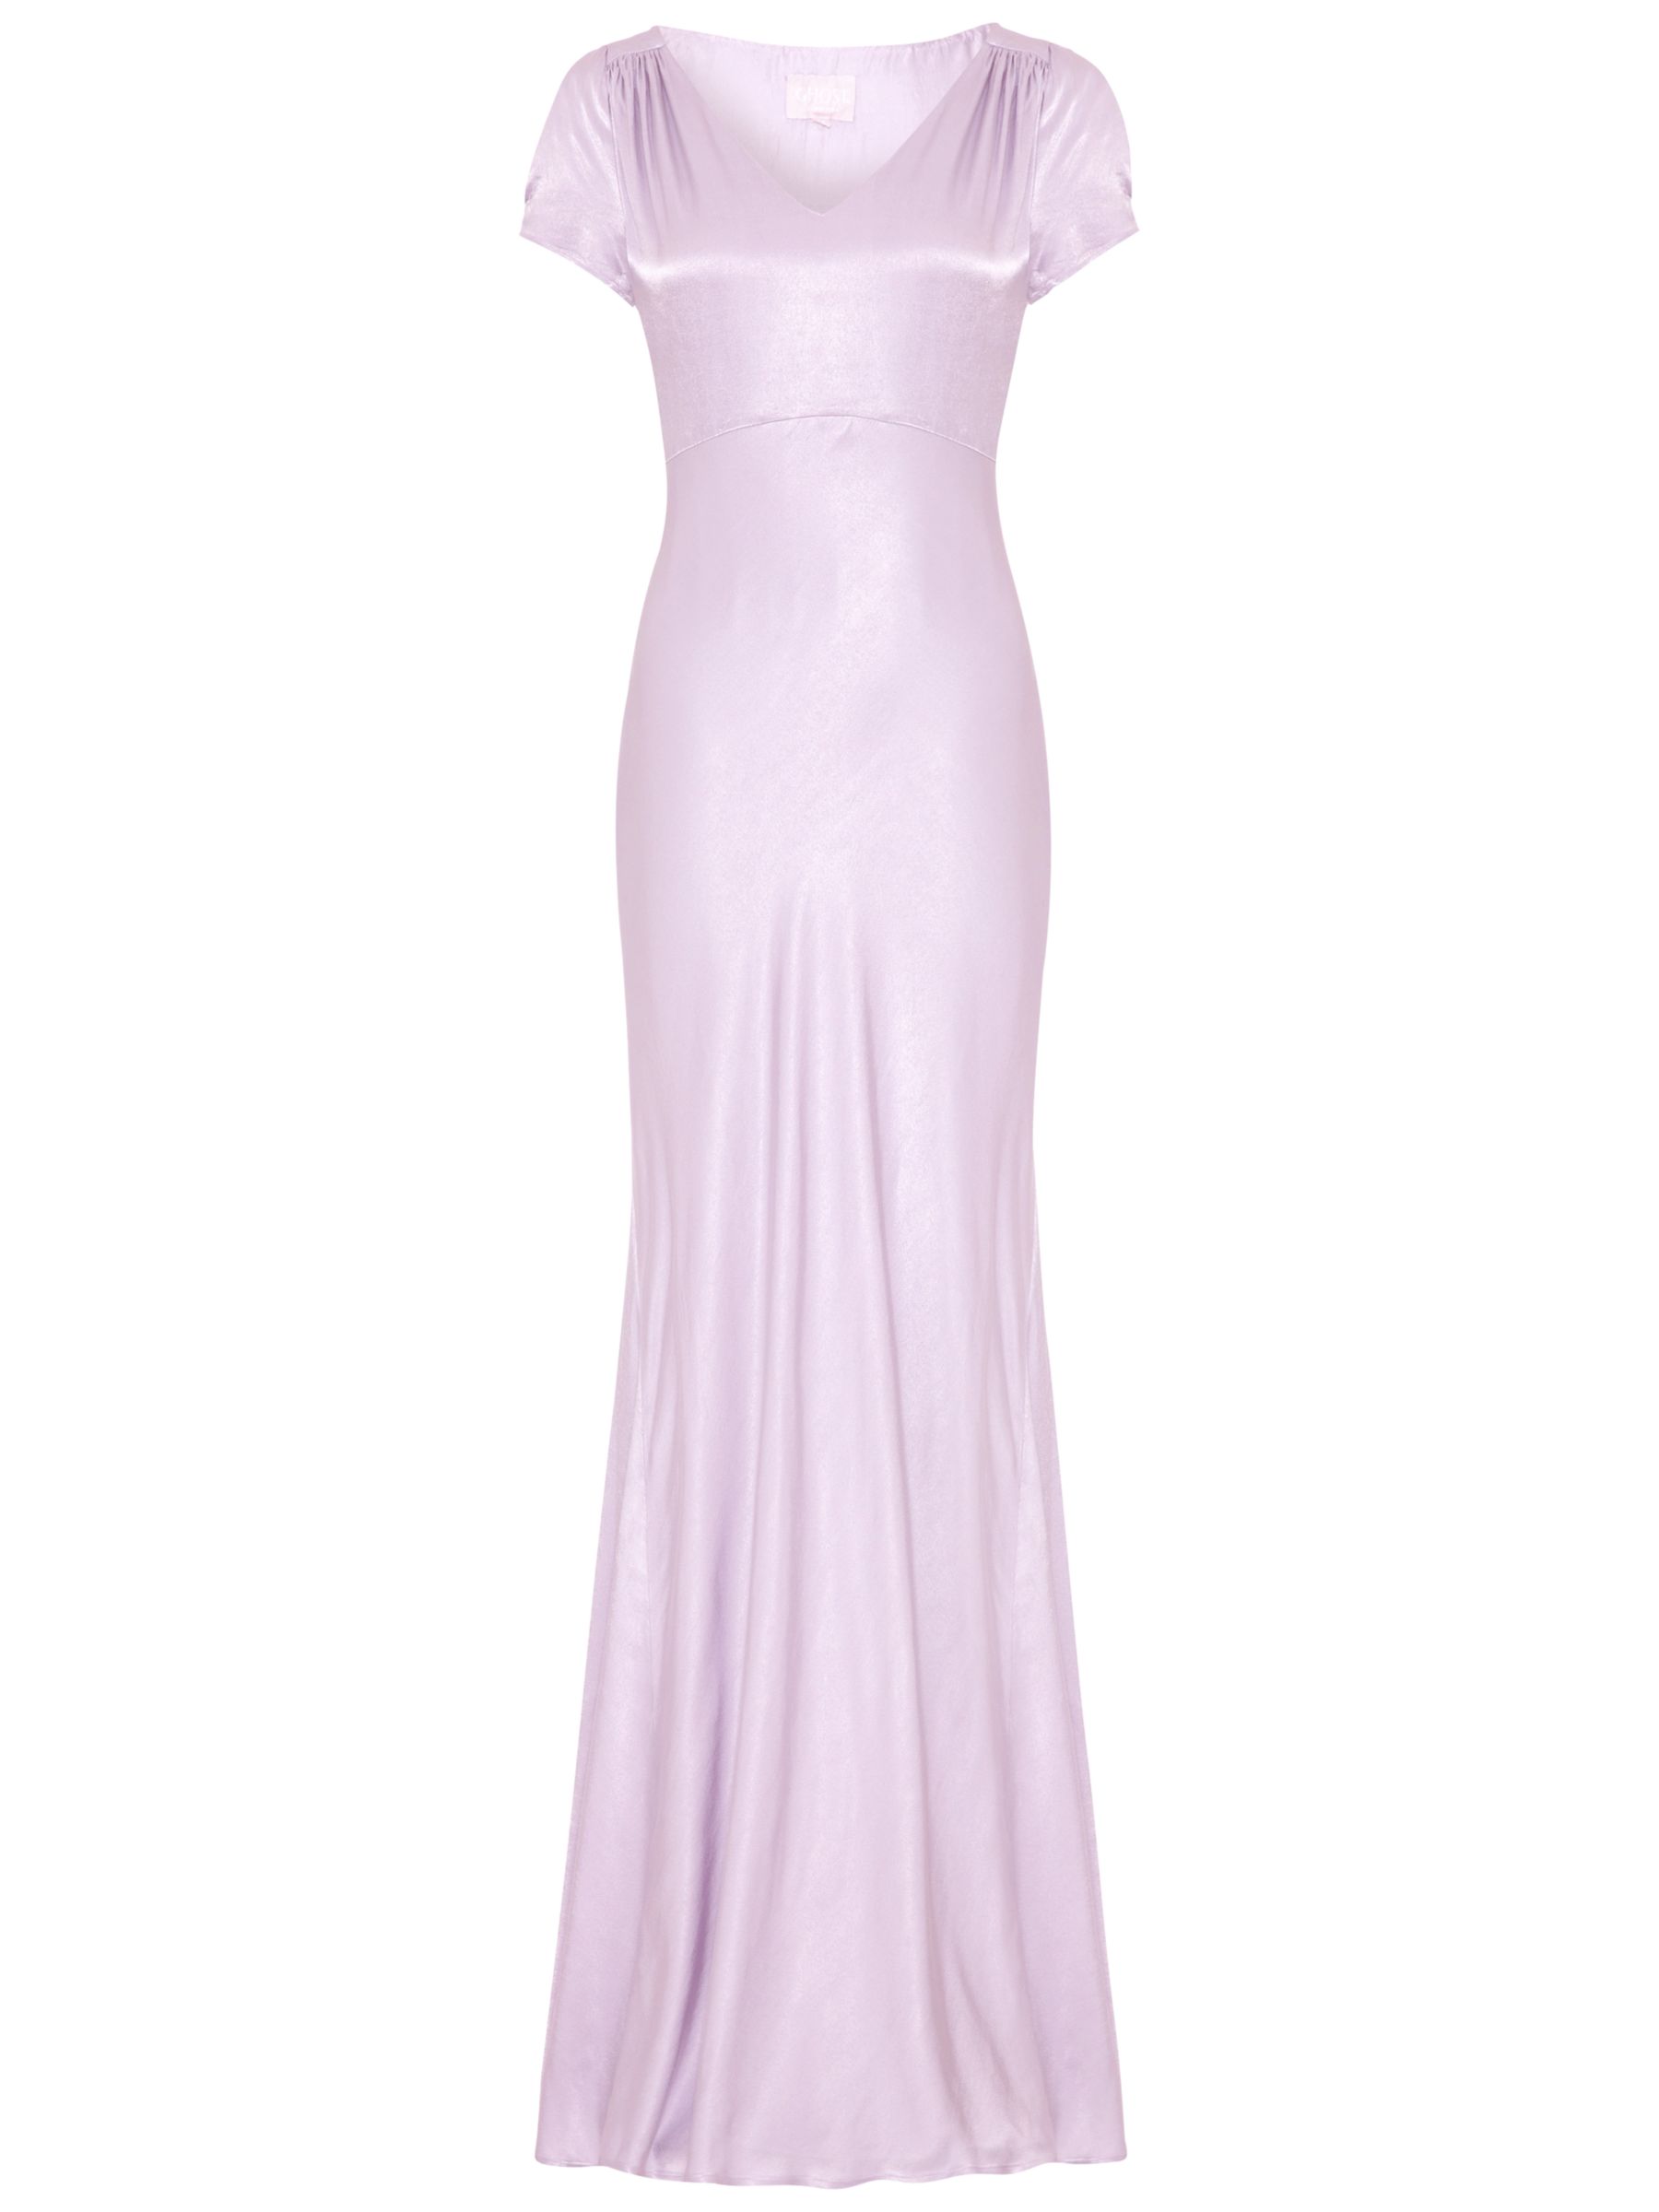 Ghost Charlotte Dress, Lilac